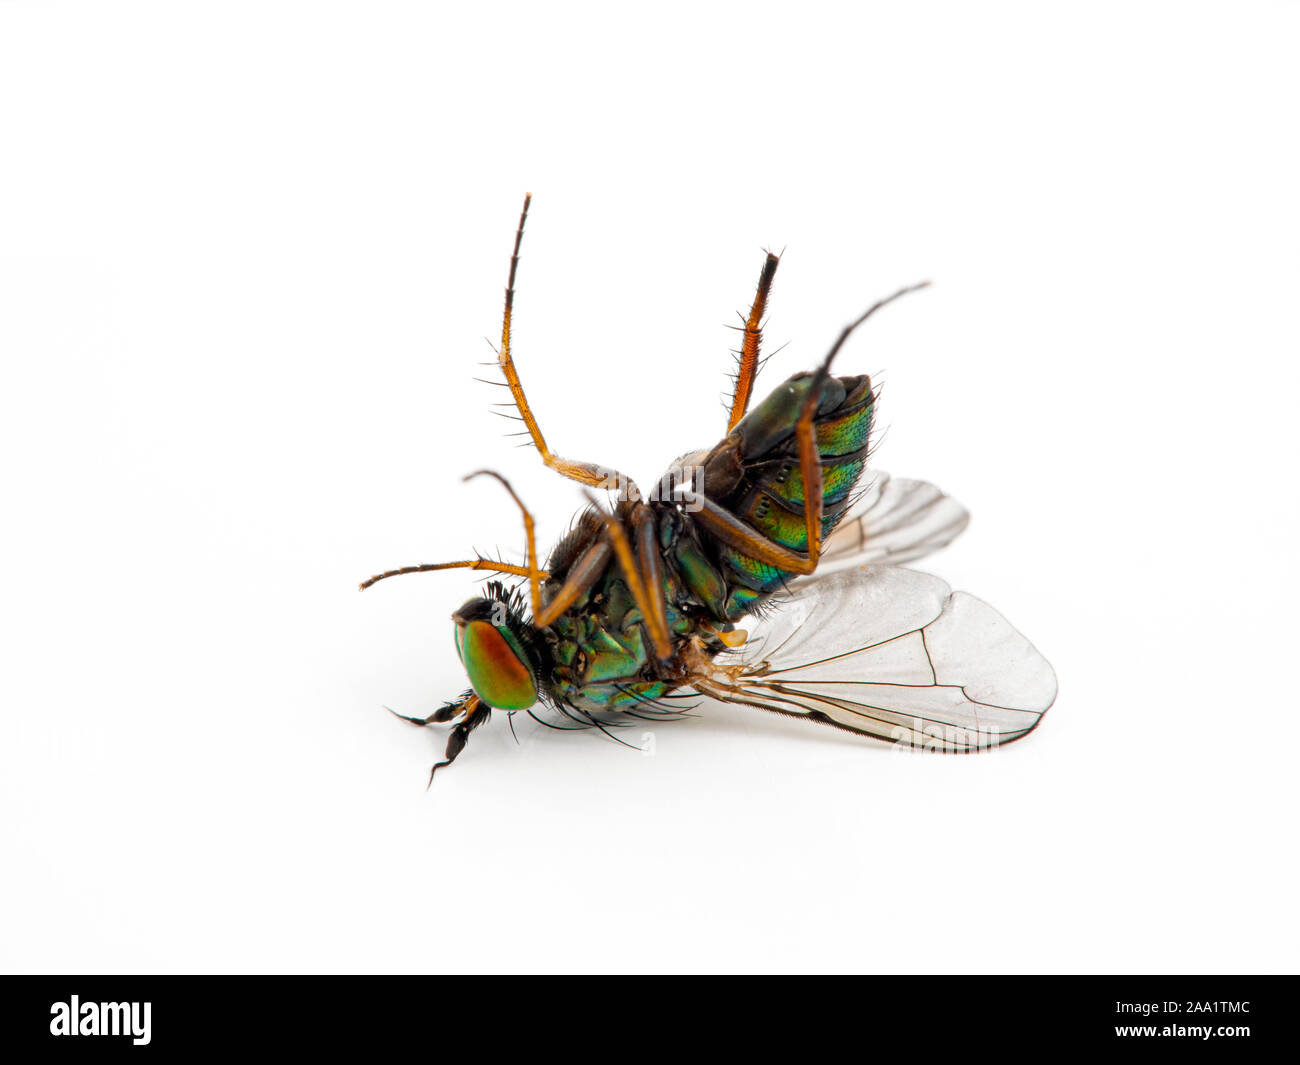 Very colorful dead male long-legged fly, Dolichopus crenatus, isolated Stock Photo